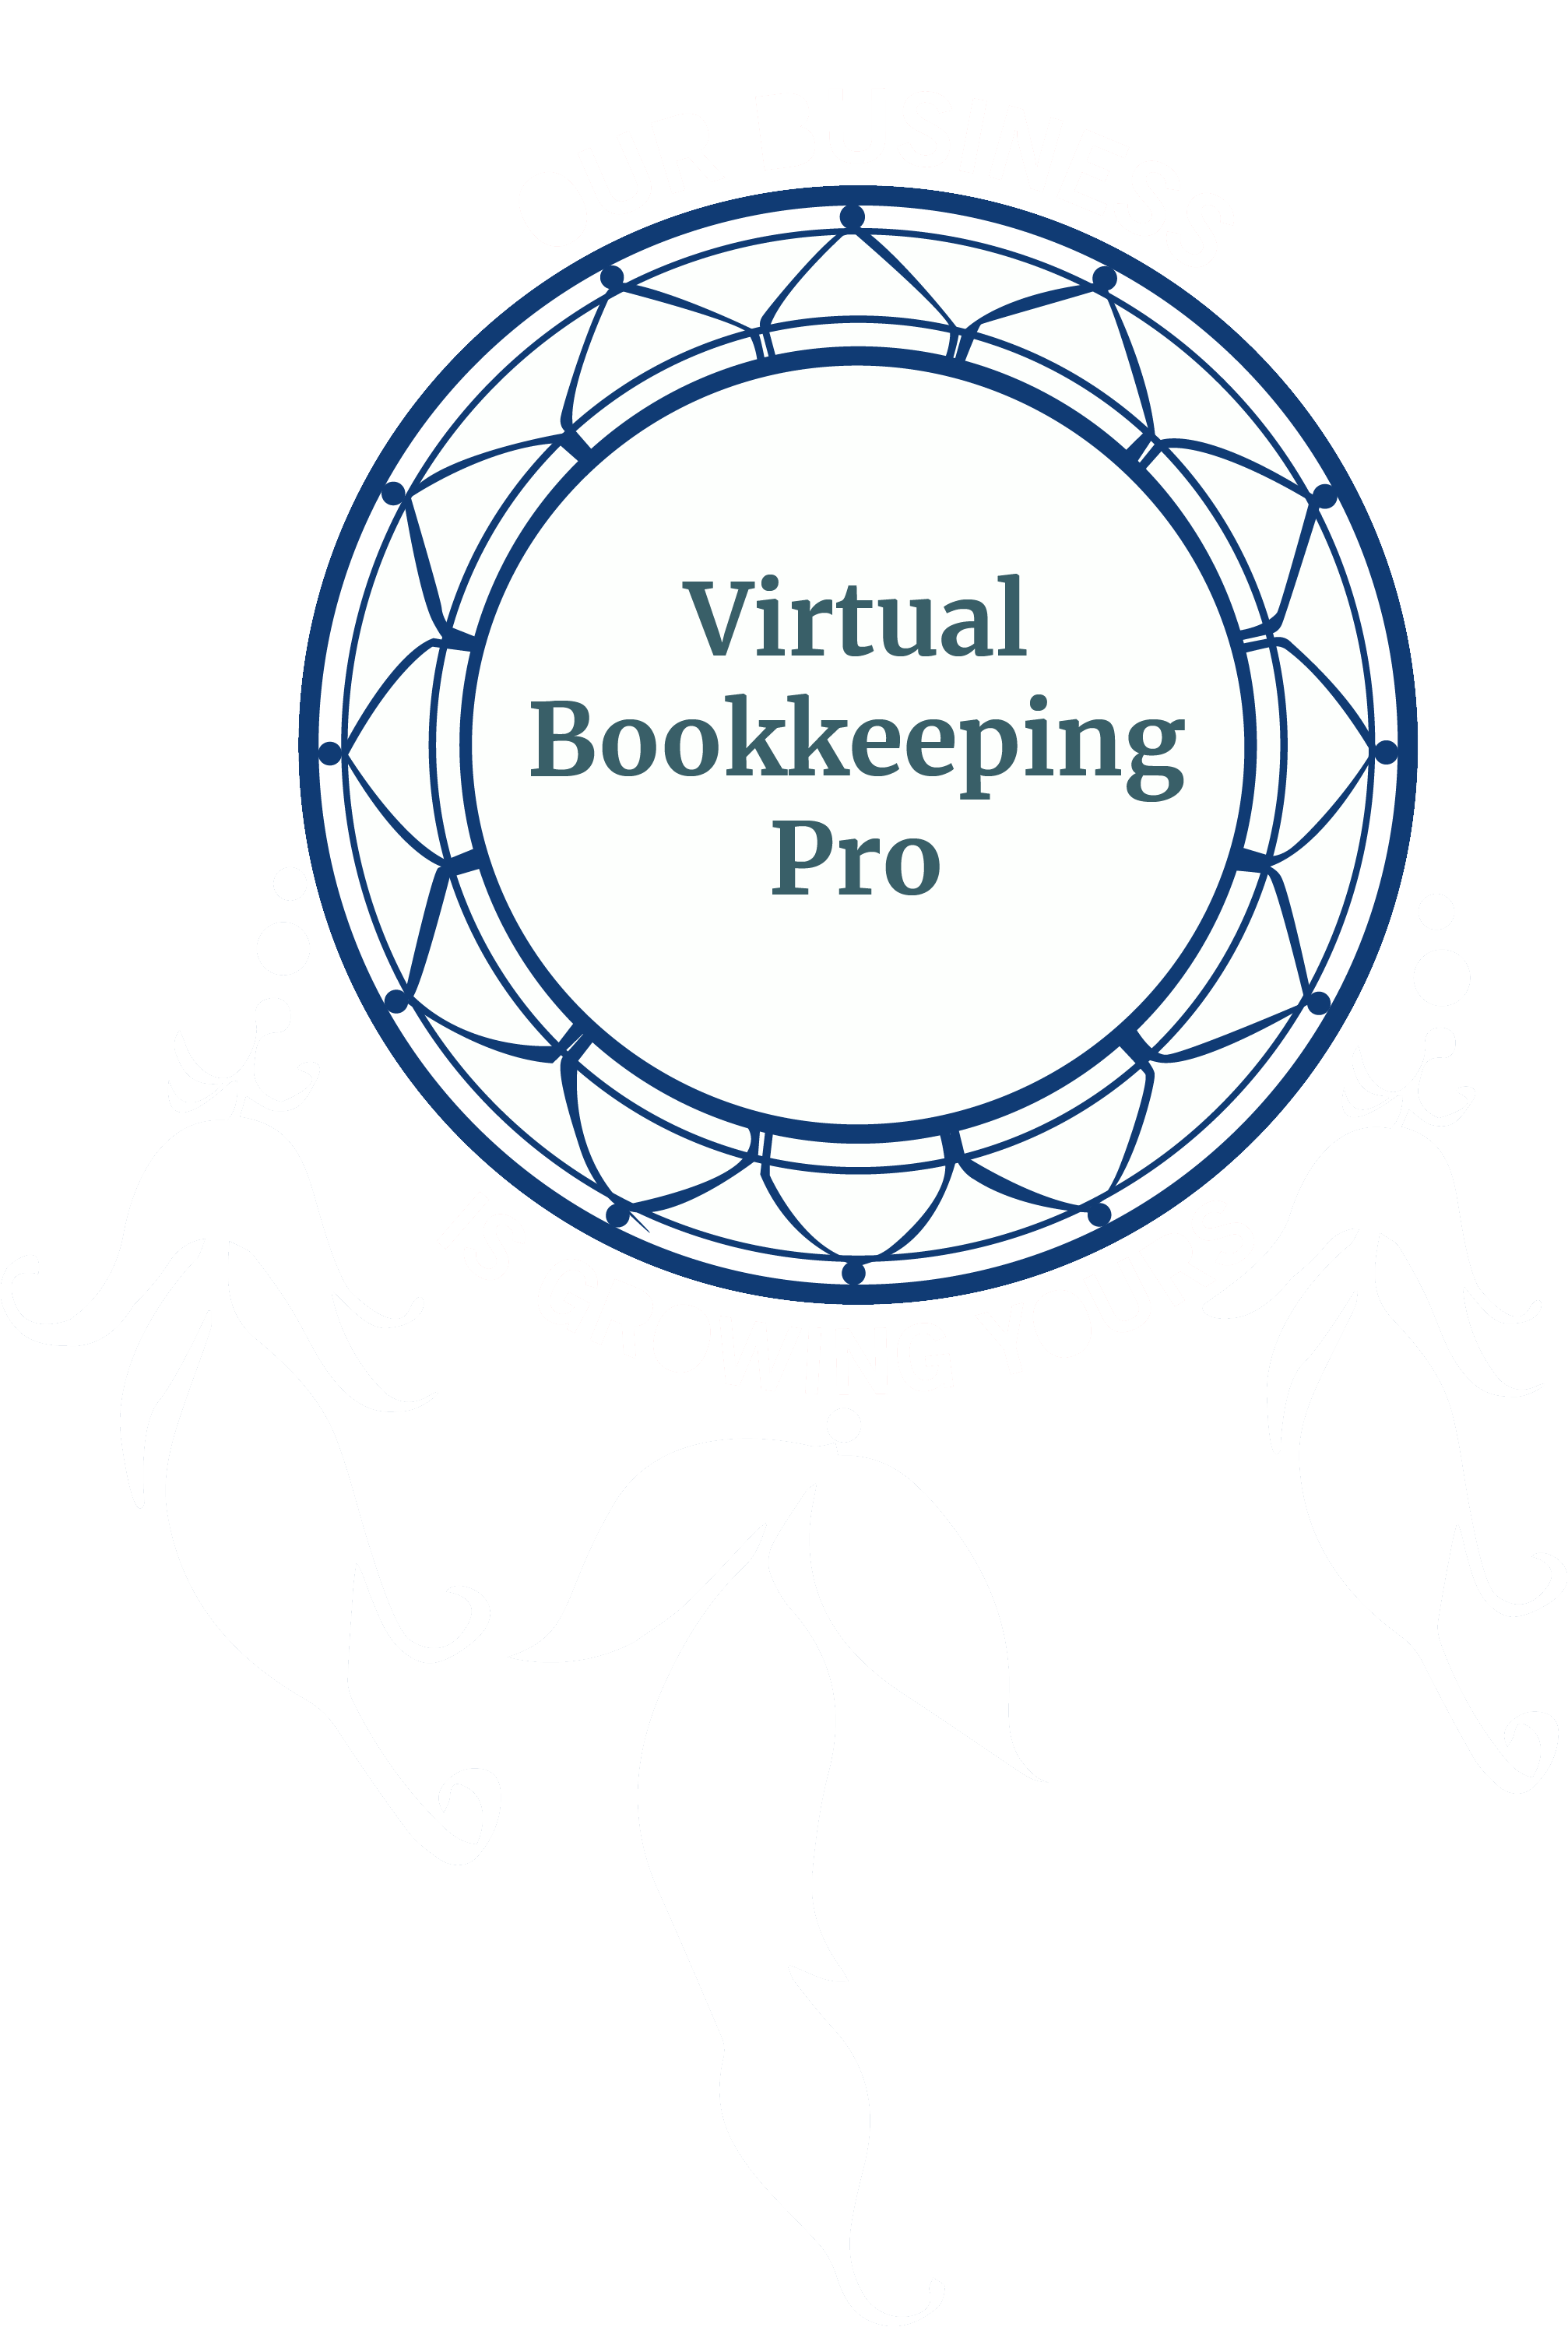 Cross Professional Business Services LLC, virtual bookkeeping & accounting